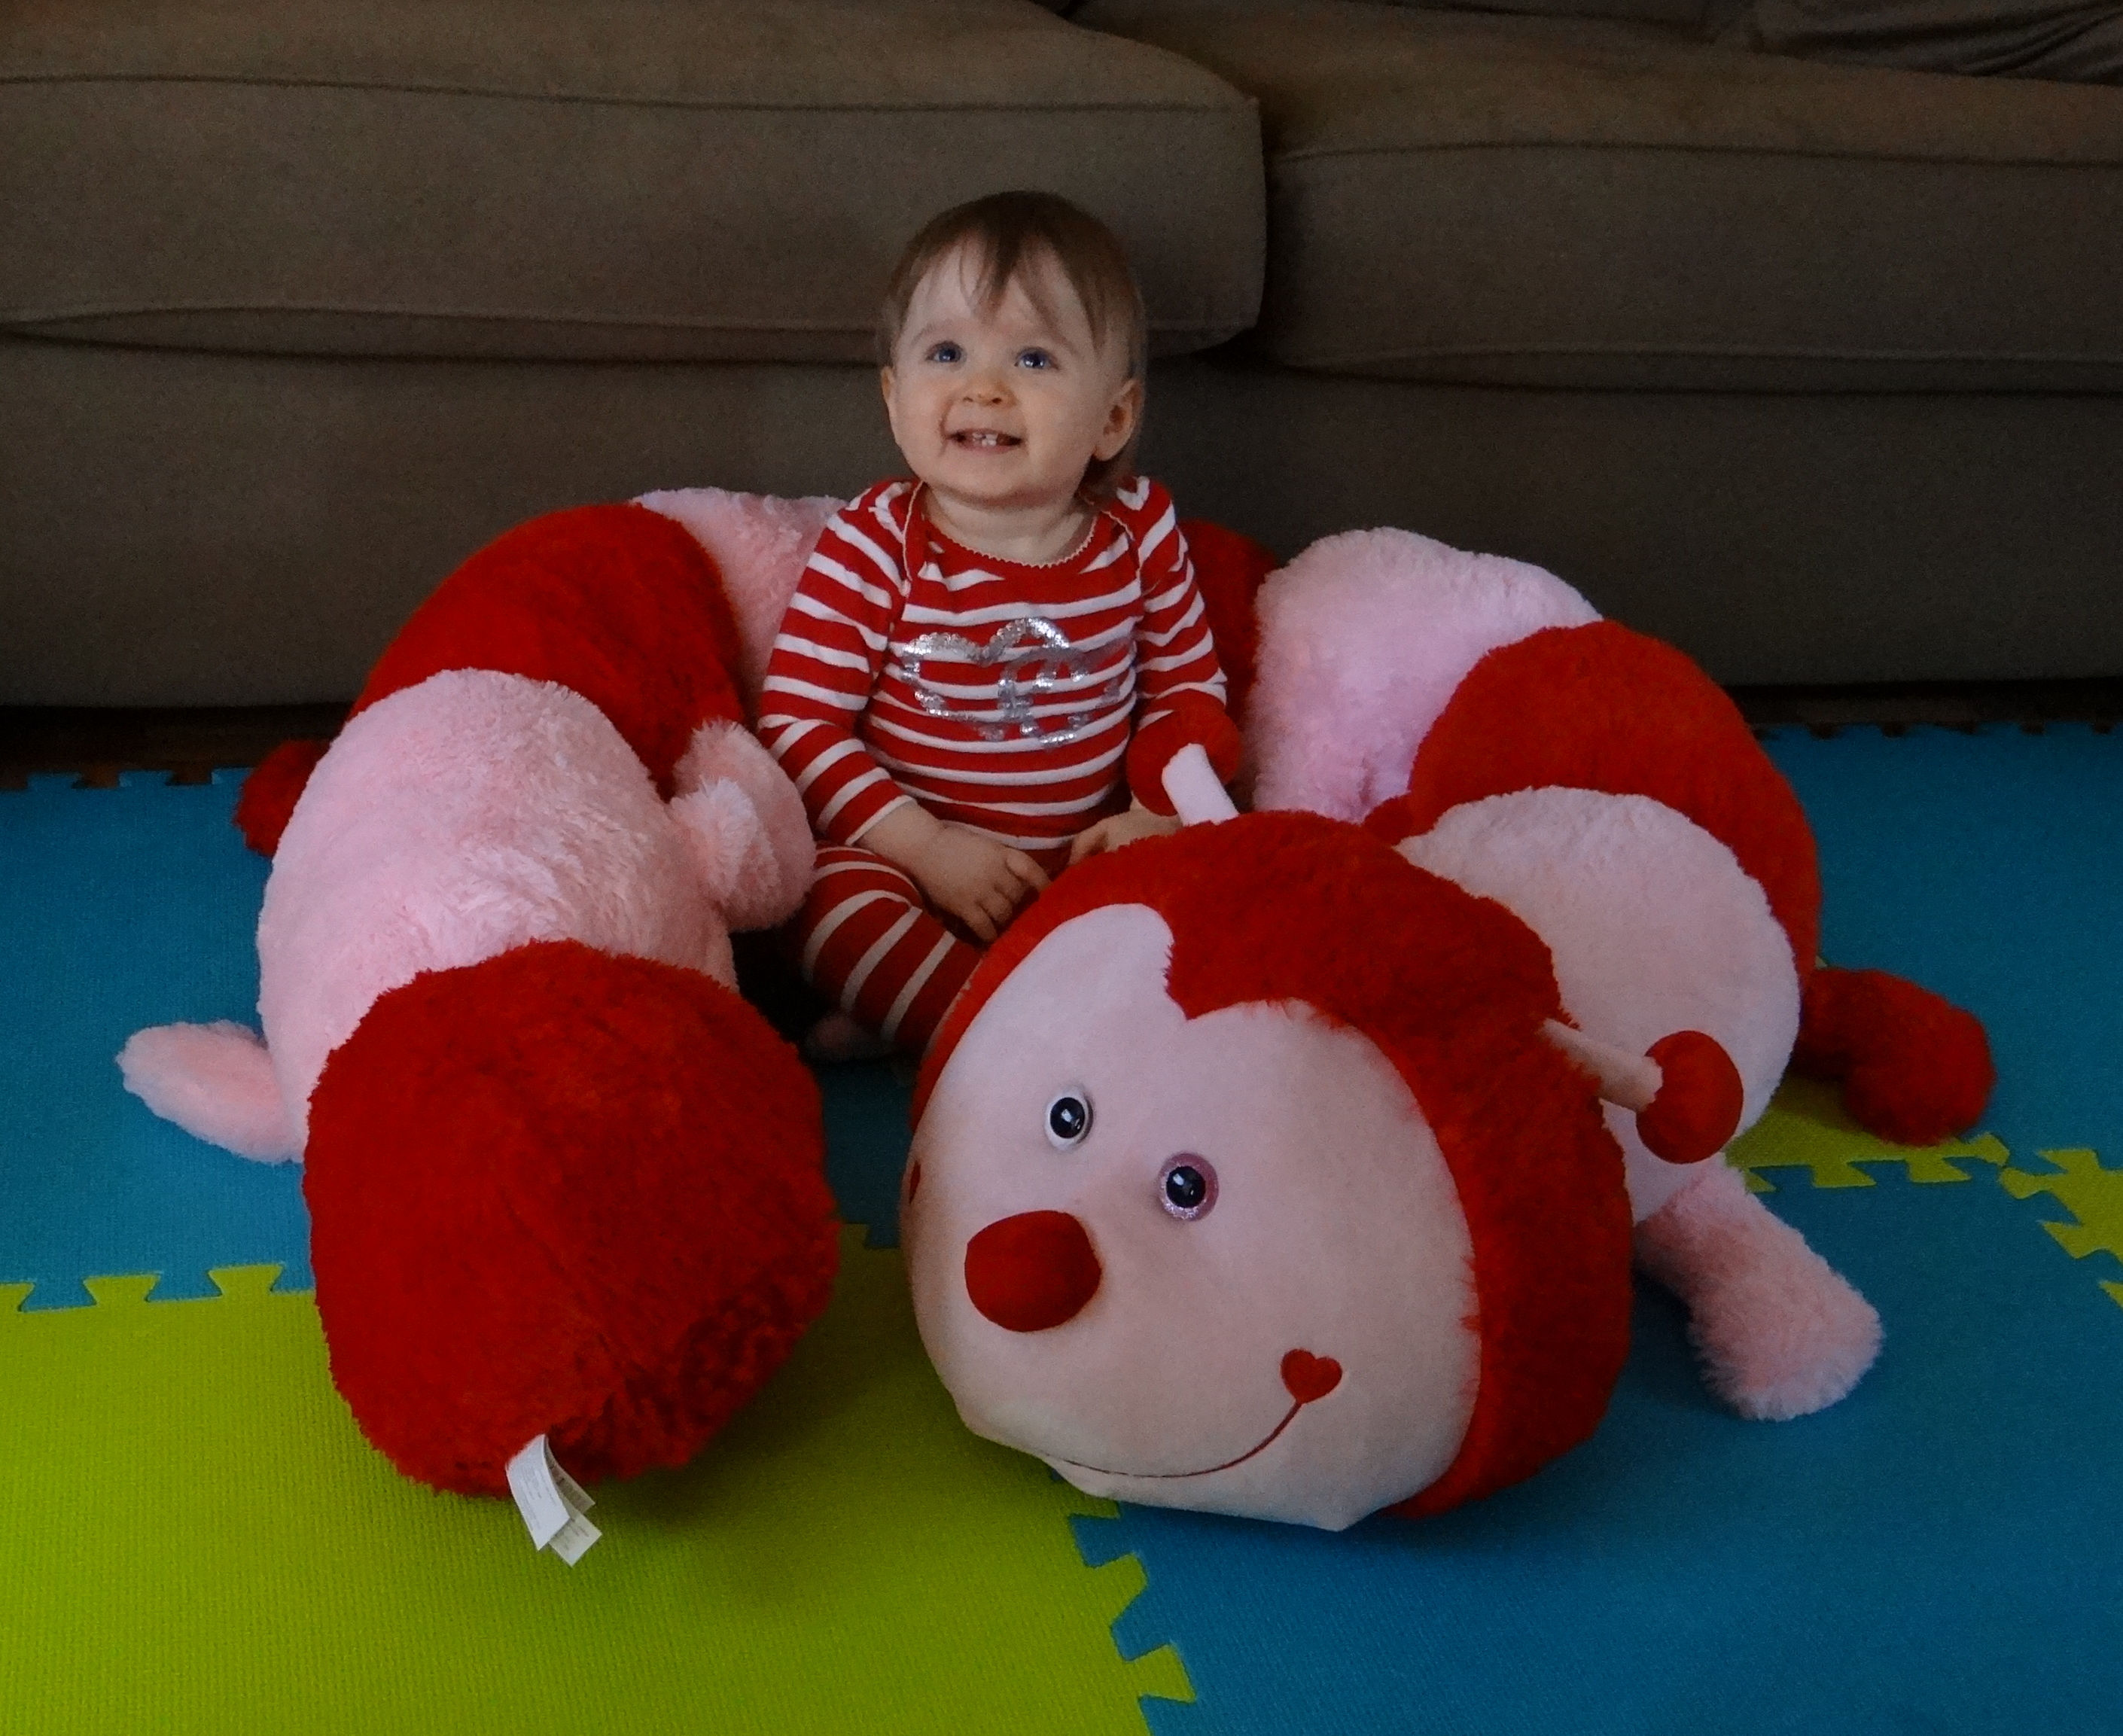 Baby with a giant stuffed caterpillar for Valentine's Day